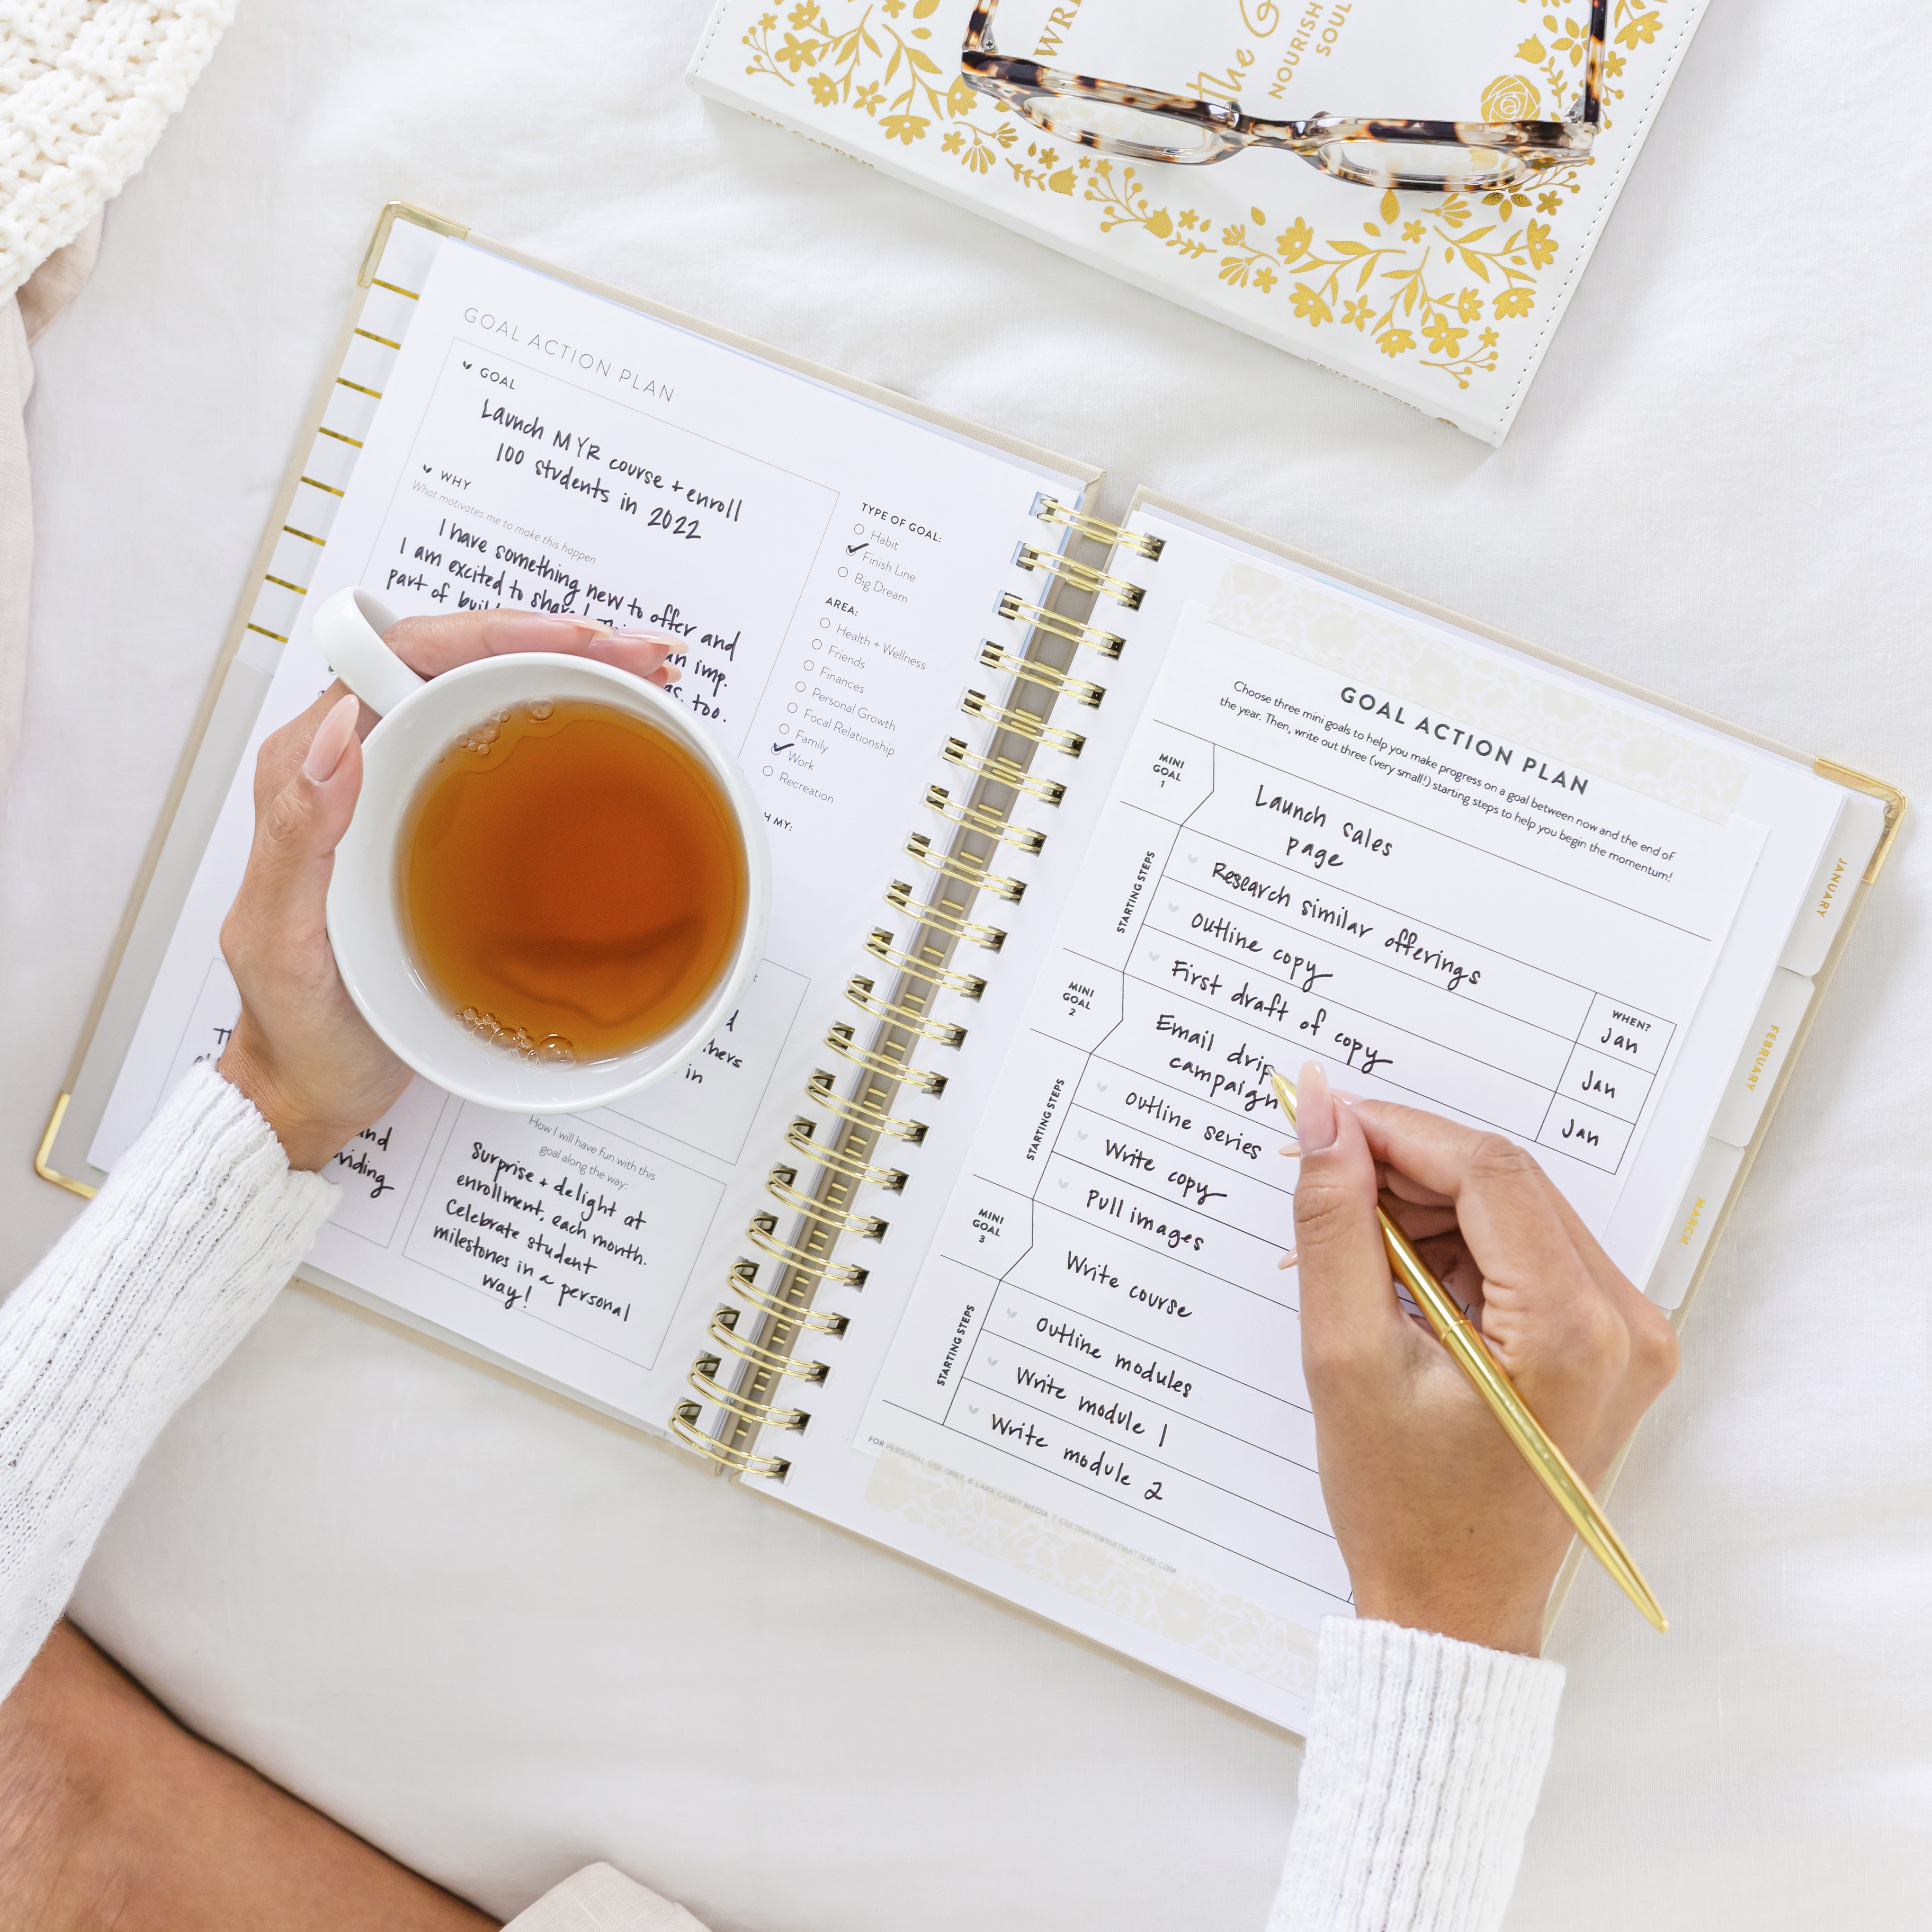 The PowerSheets goal-setting planner